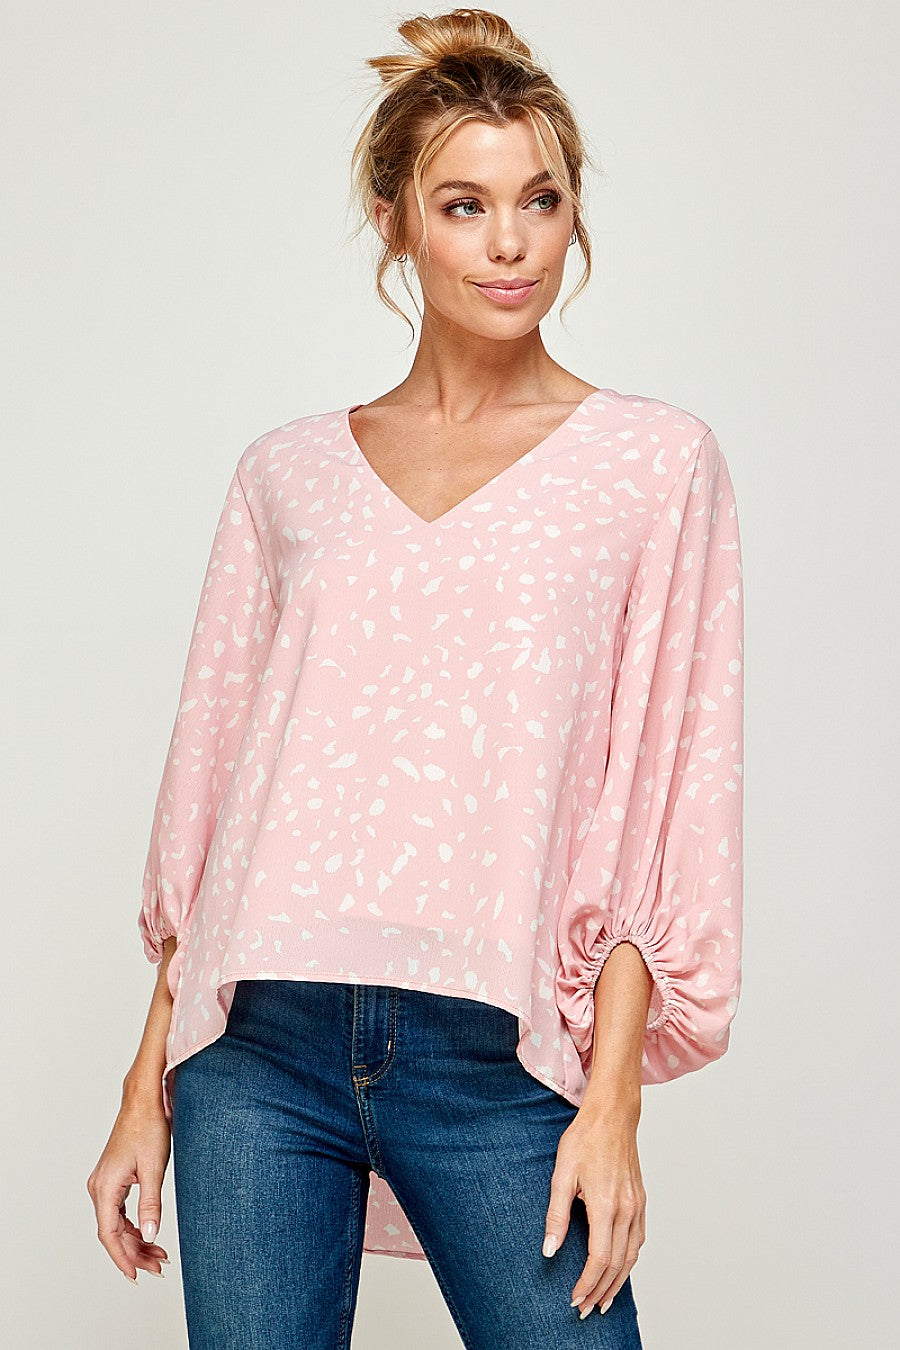 The Emory Top